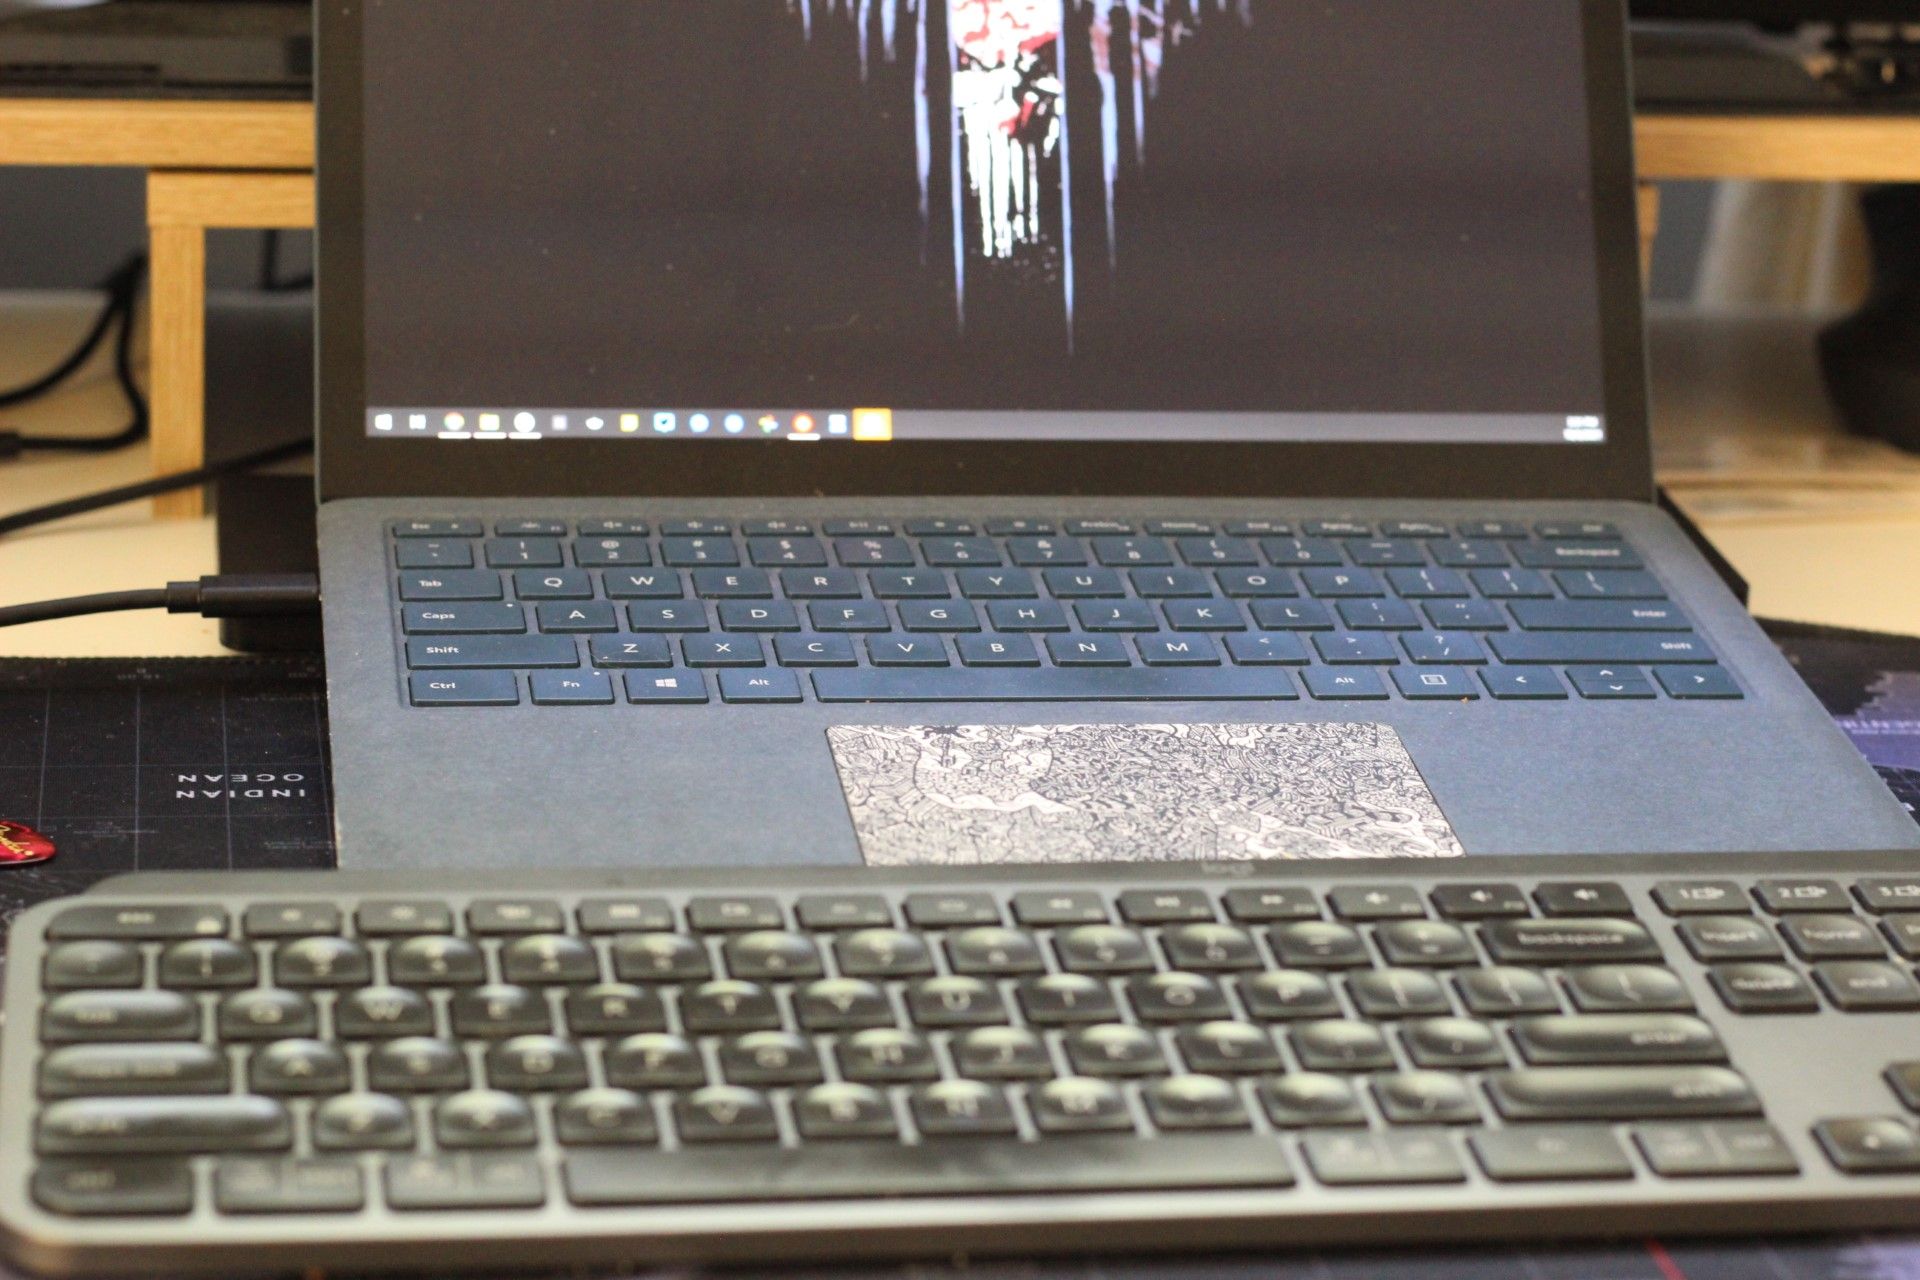 The dock hooked to a 13-inch Surface Laptop 3